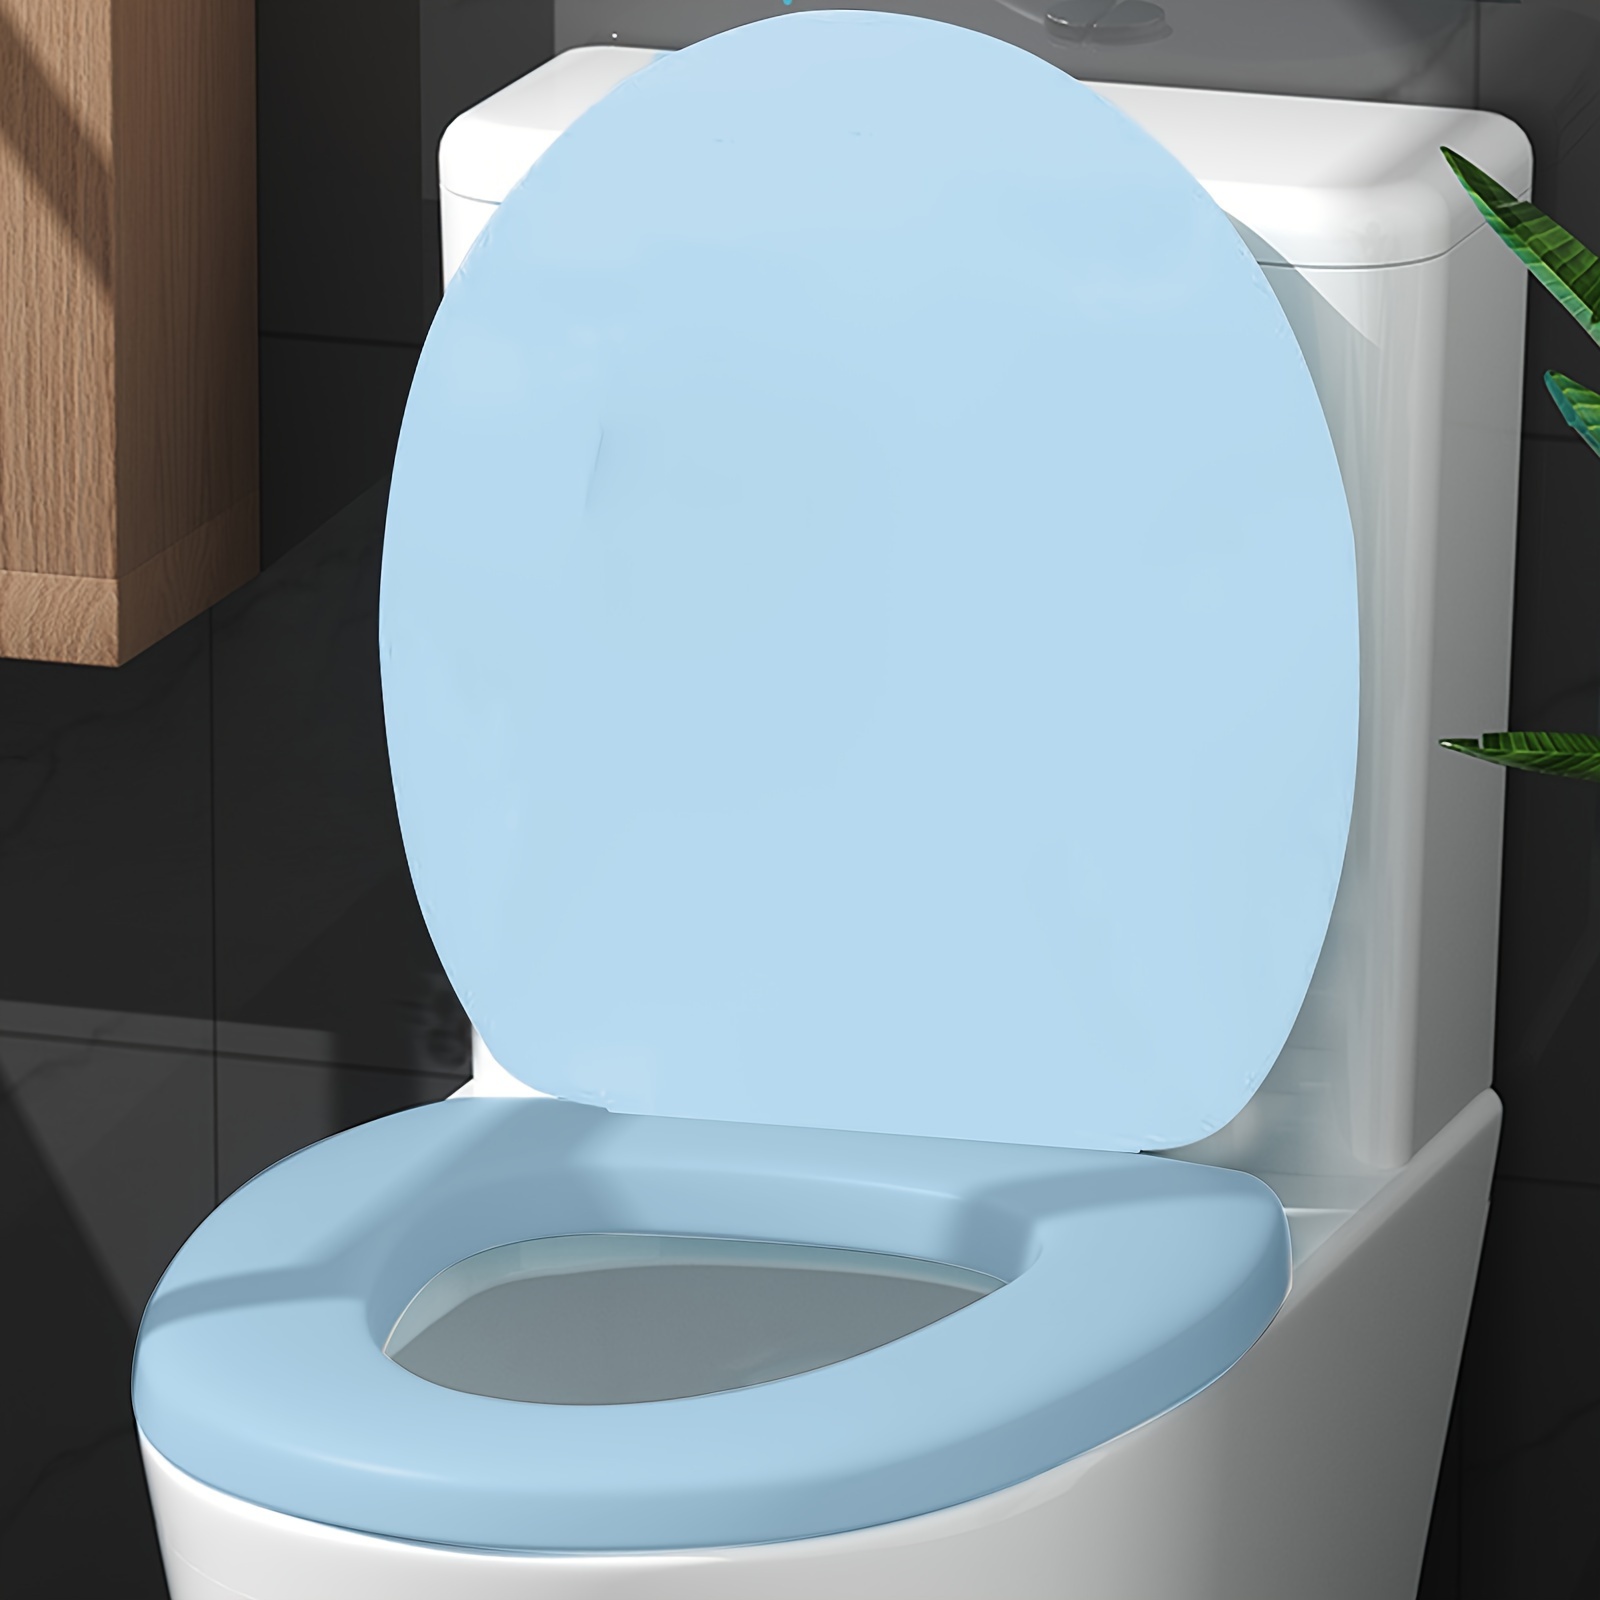 

Toilet Seat Durables Round Toilet Seat Soft Comfort With Quick Release And Quick Attach Plastic Toilet Seat With Soft Close Never Loosen Easy Install And Clean